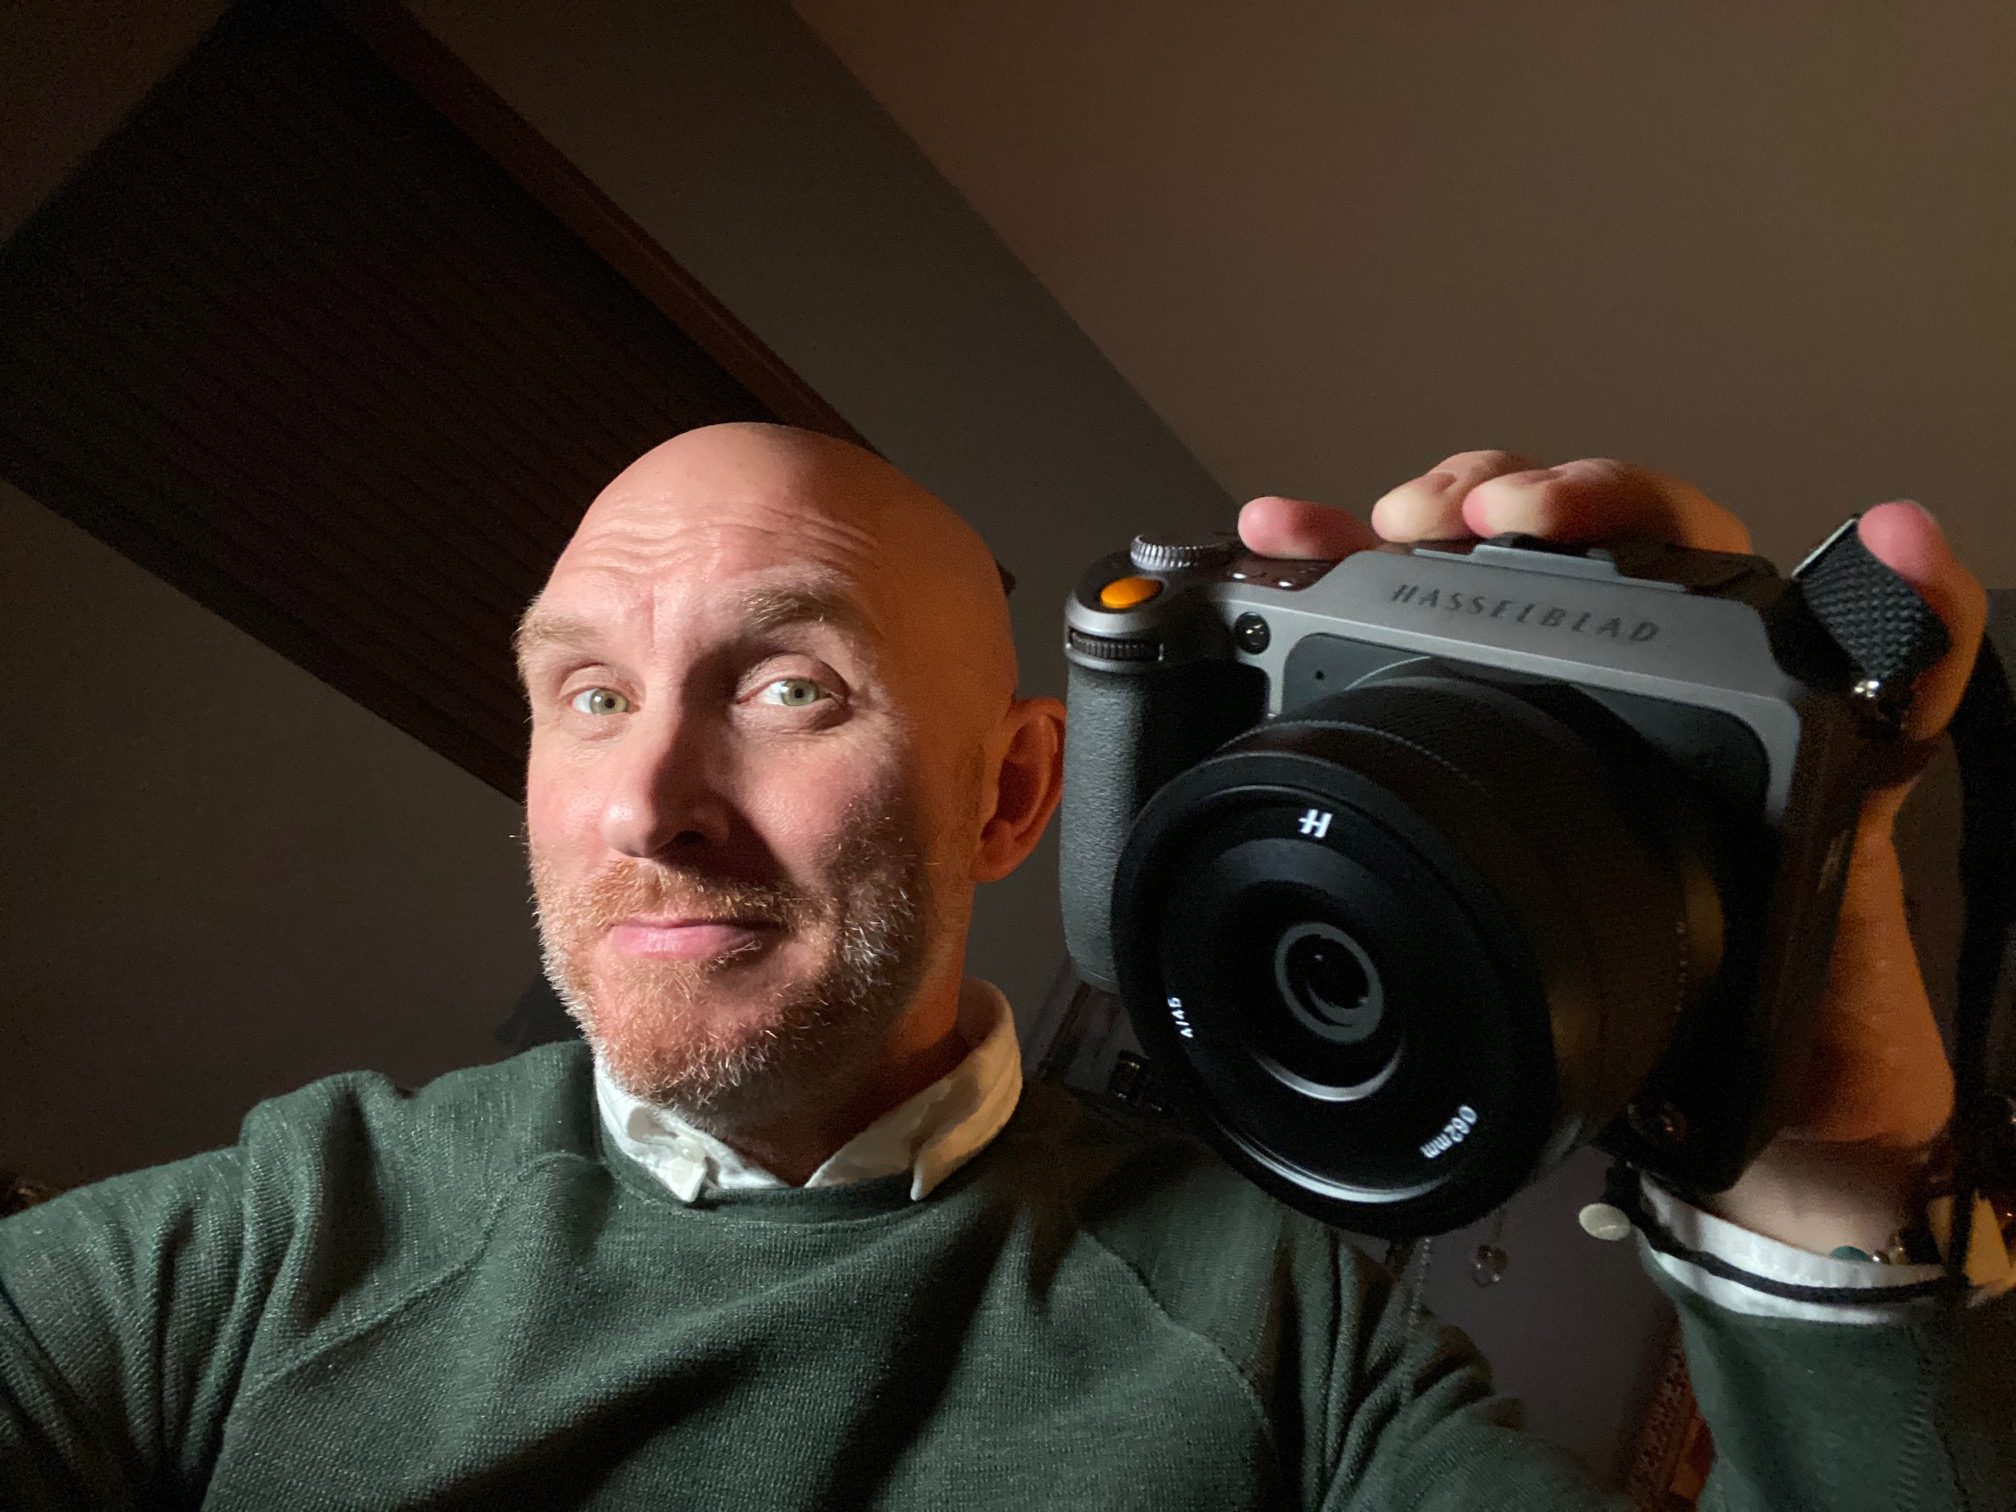 The Hasselblad XCD 45mm f/4 P Lens In hand, my first thoughts! The